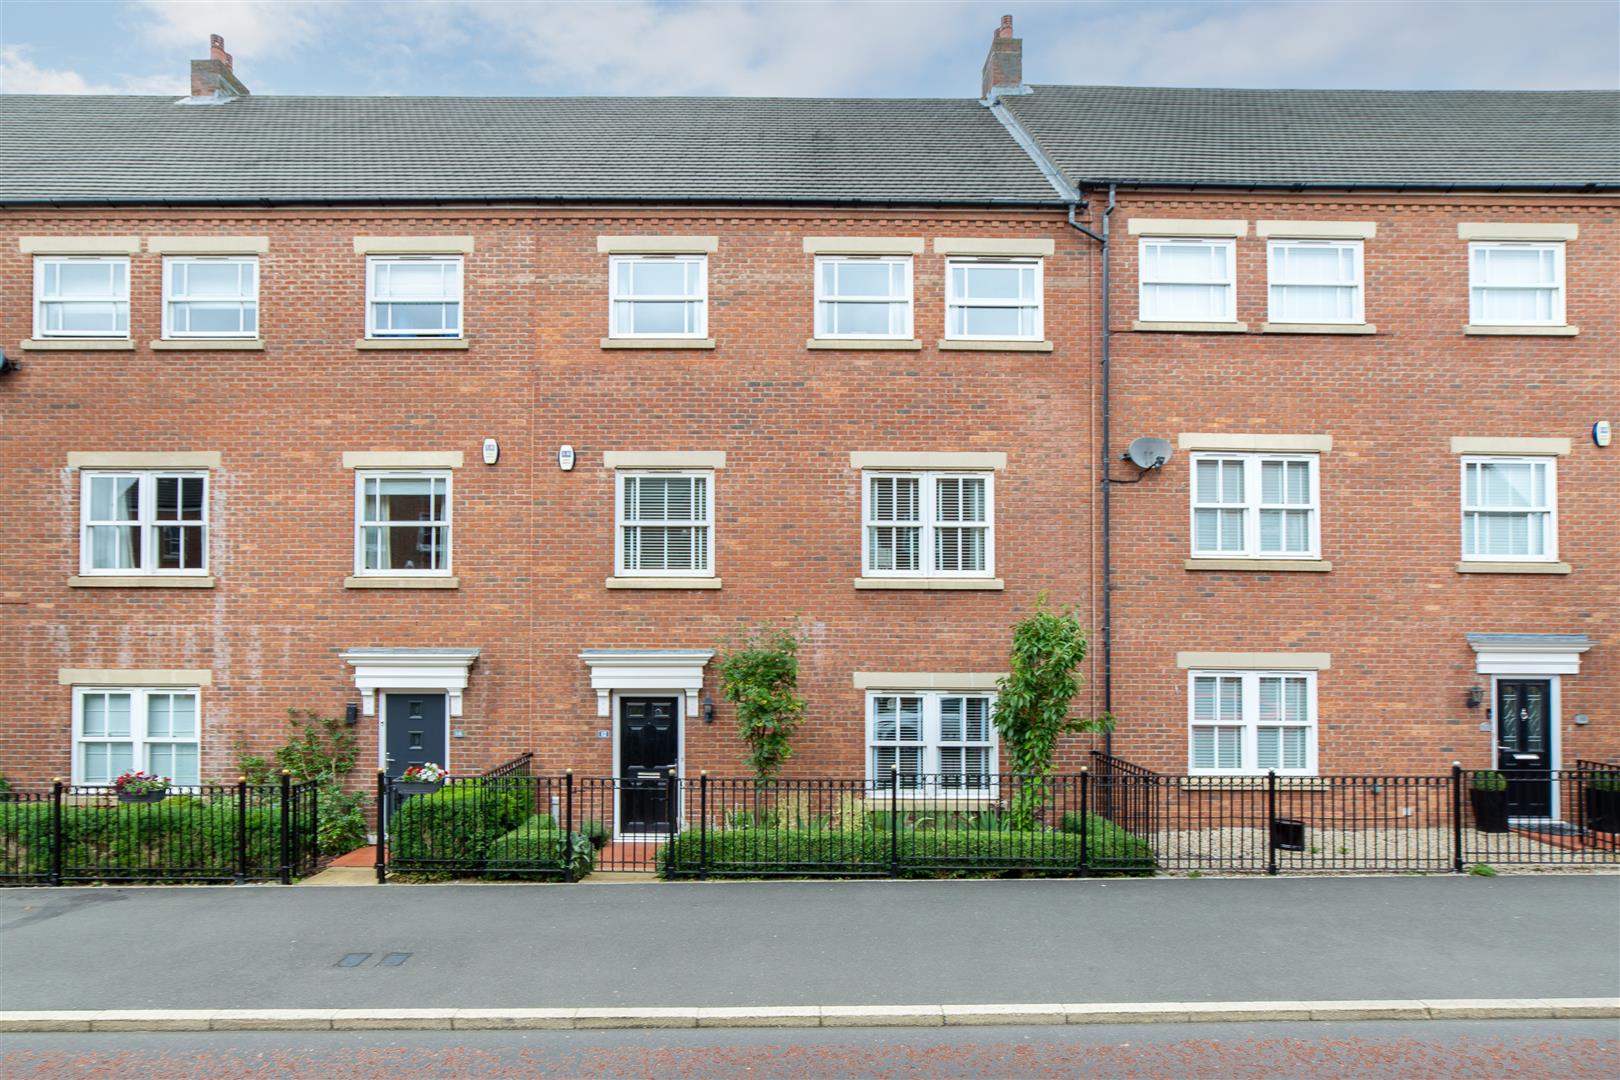 6 bed town house for sale in Featherstone Grove, Great Park - Property Image 1